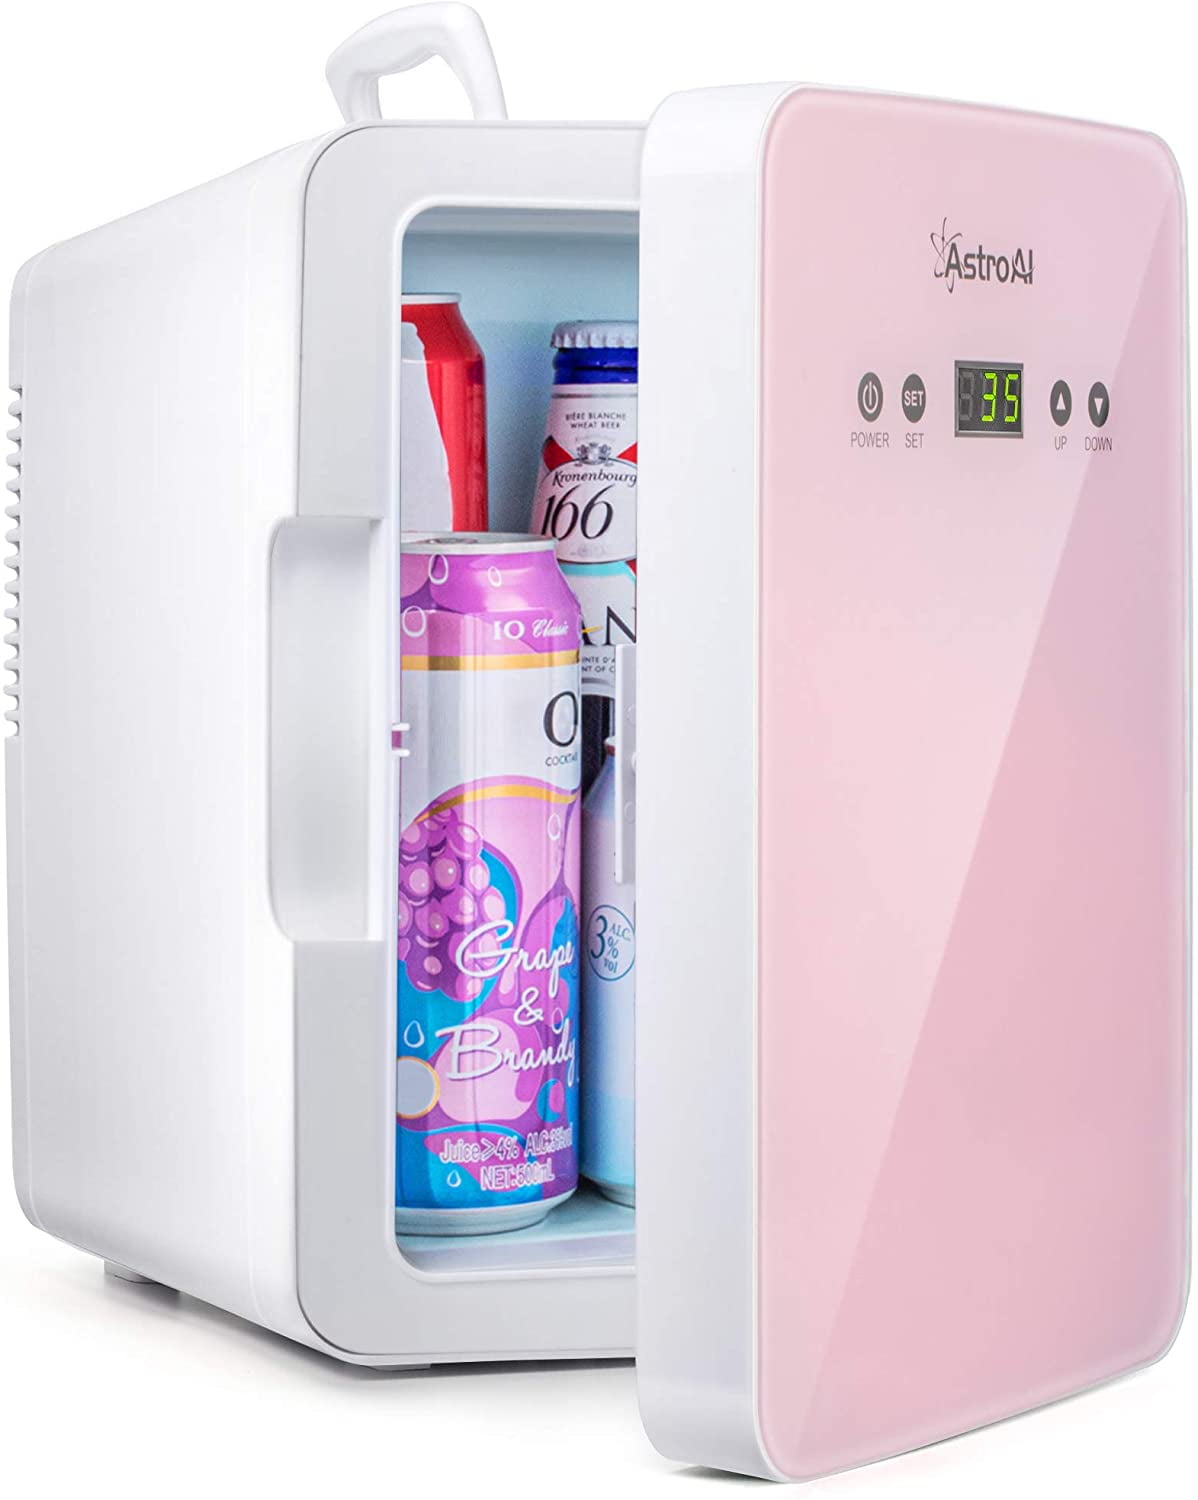 AstroAI Mini Fridge 6 Liter/8 Can Electric Portable Cooler/Warmer, Pink,  for gifts